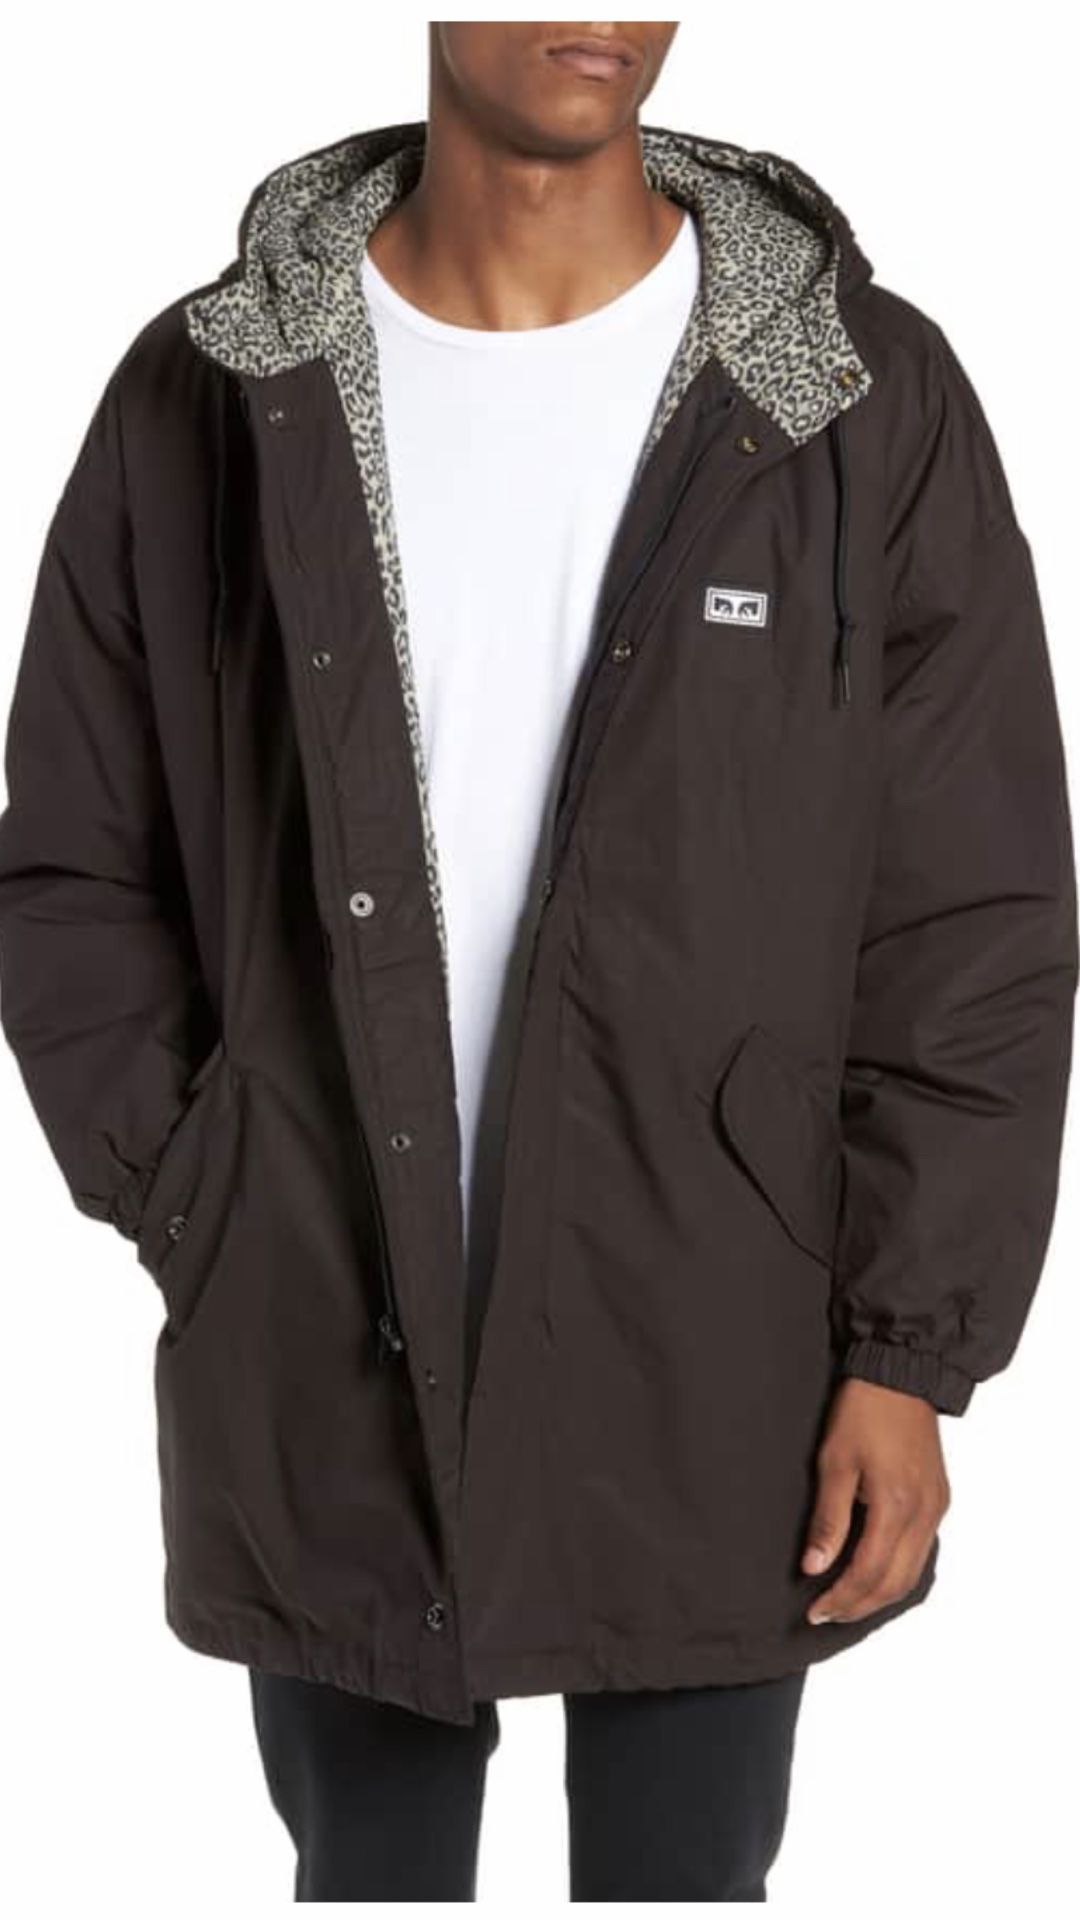 Obey Men’s hooded Parka brand new